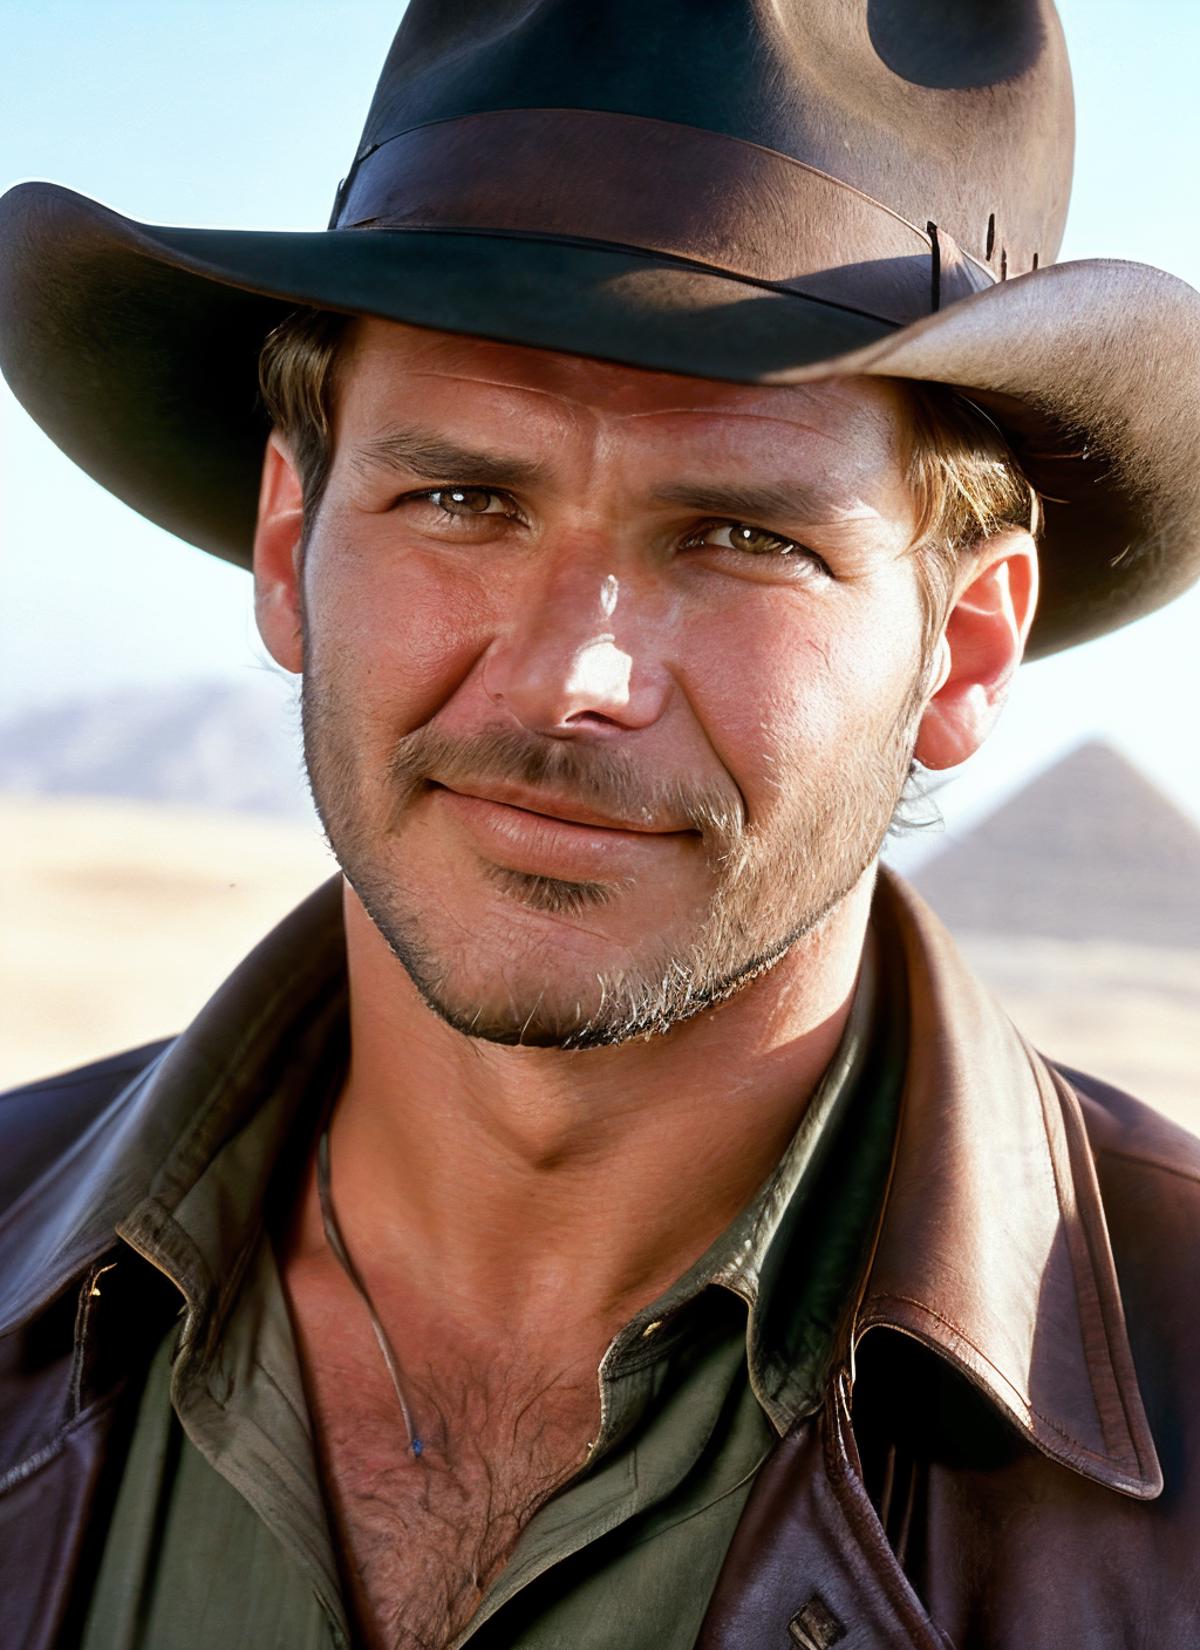 Harrison Ford (Indiana Jones, Blade Runner & Han Solo from Star Wars) image by ceciliosonata390